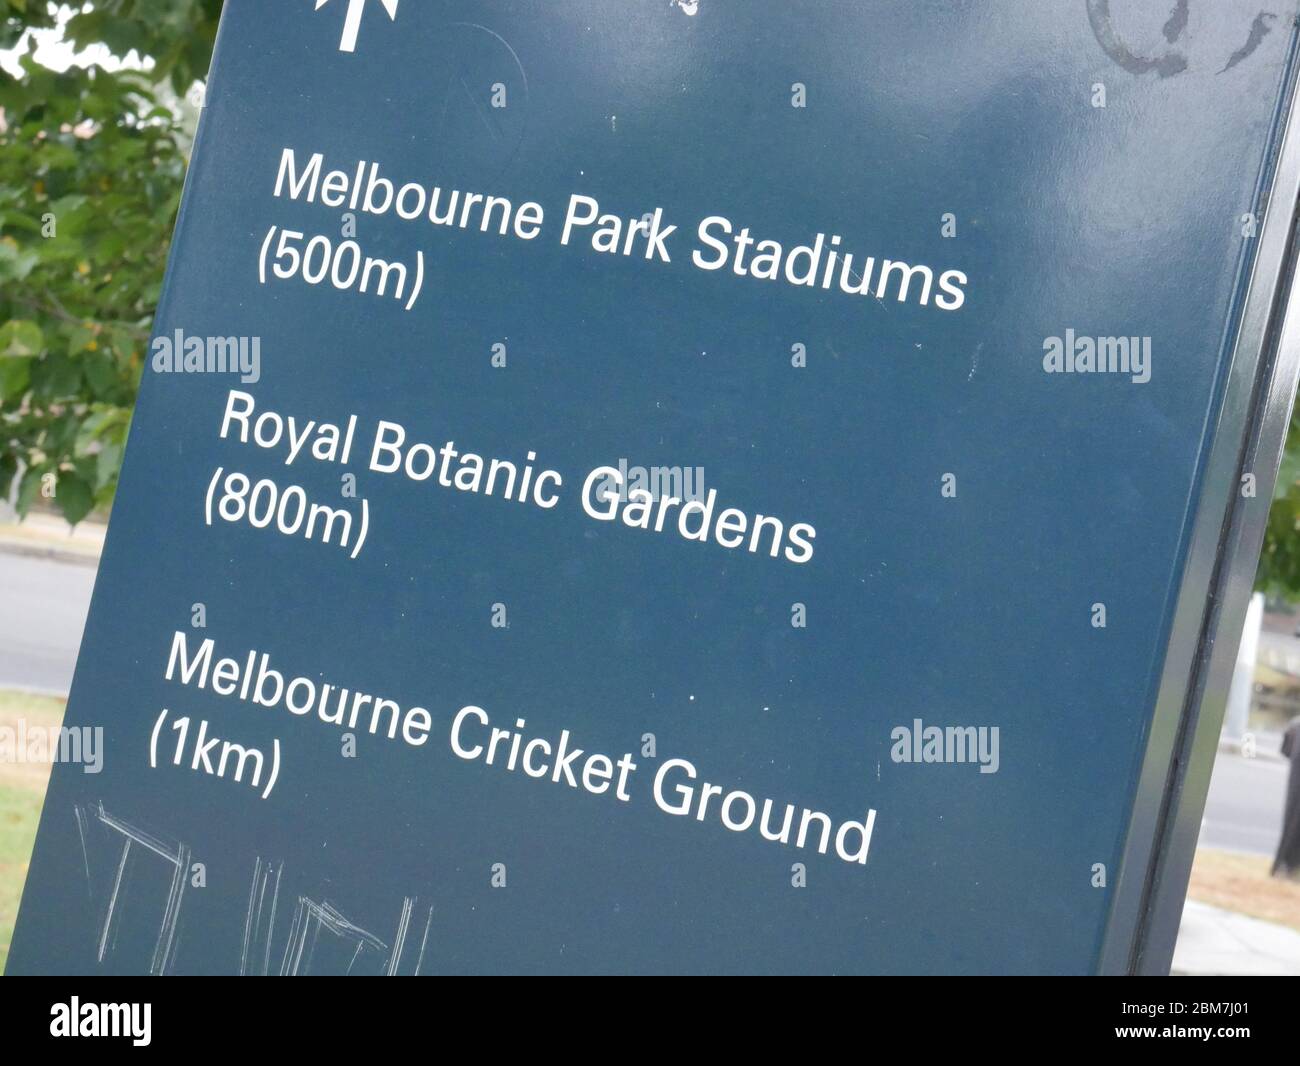 Sign for Melbourne Park Stadiums and Royal Botanic Garden Stock Photo